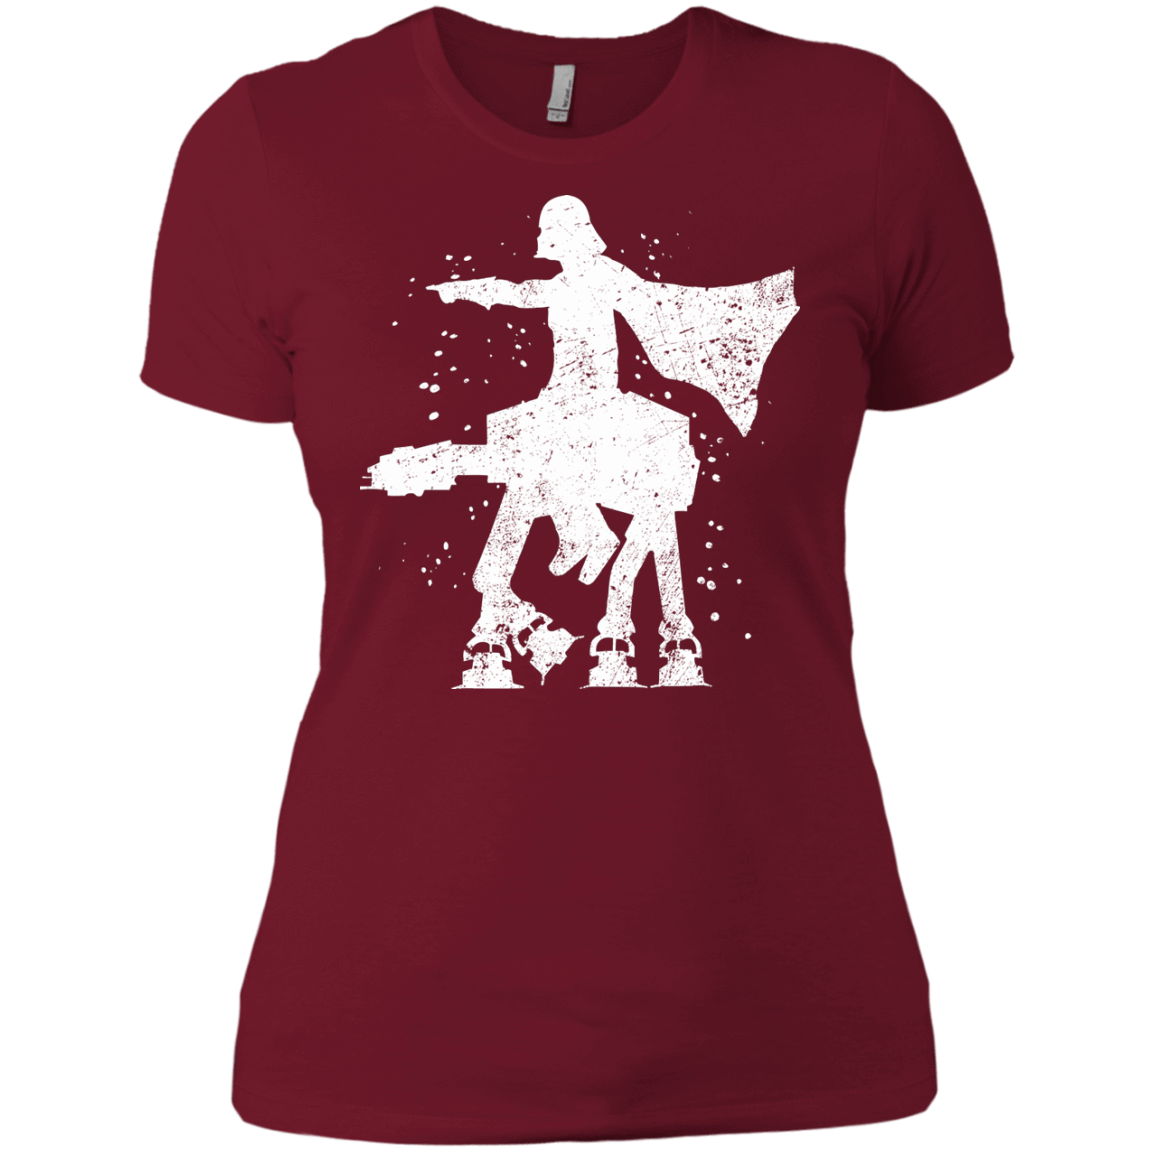 T-Shirts Scarlet / X-Small To Hoth Women's Premium T-Shirt